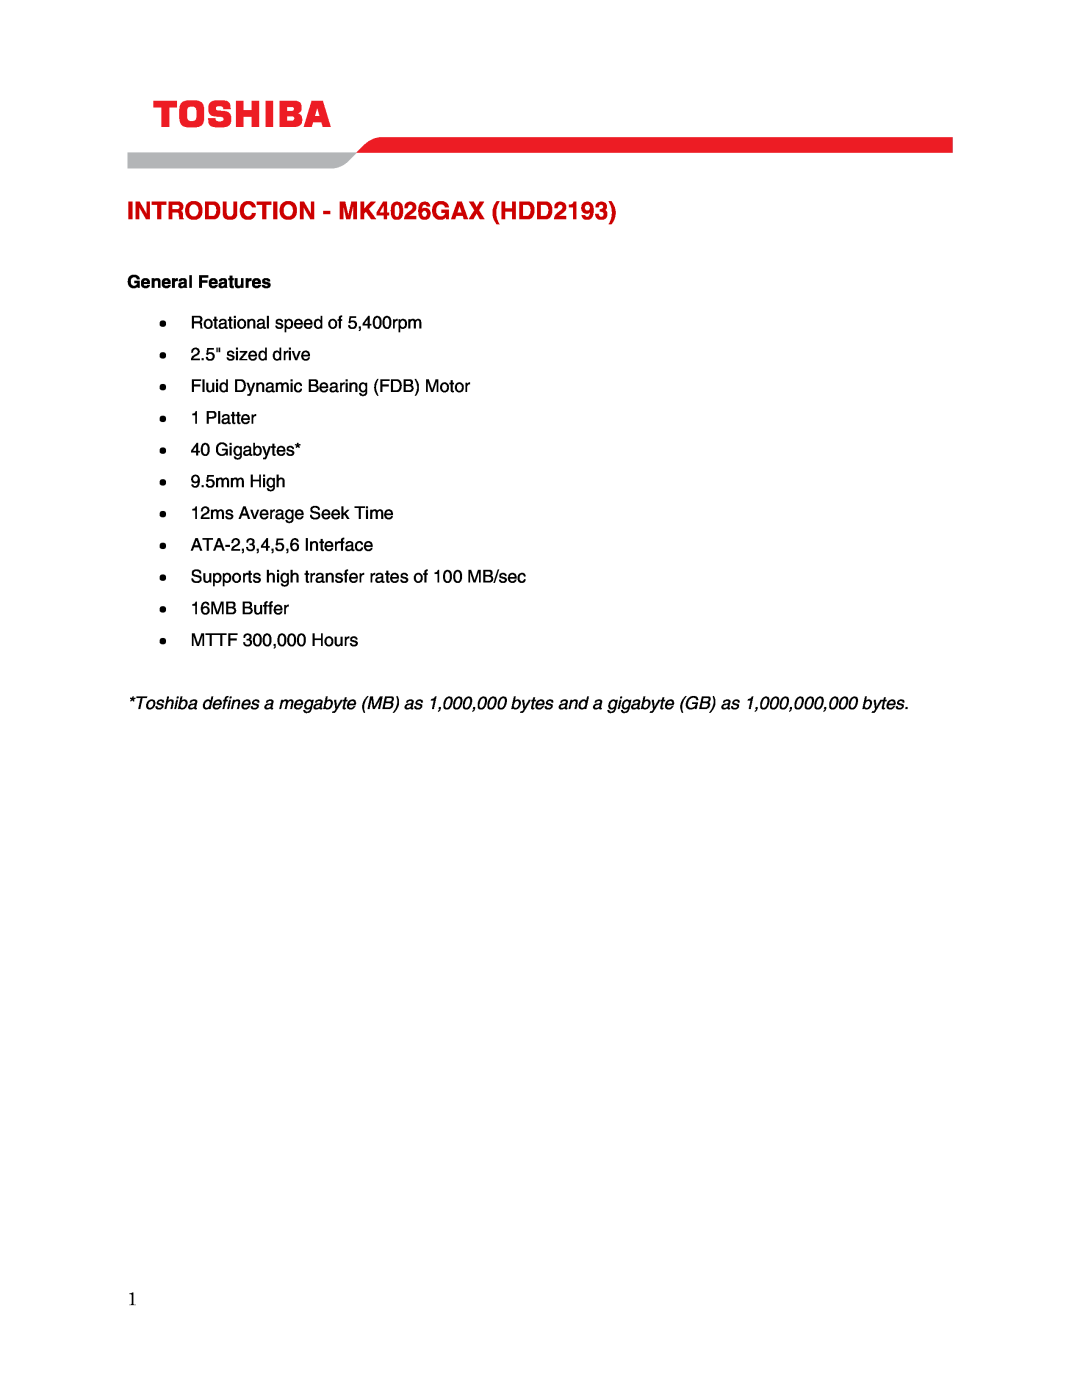 Toshiba MK4026GAX (HDD2193) user manual INTRODUCTION - MK4026GAX HDD2193, General Features 